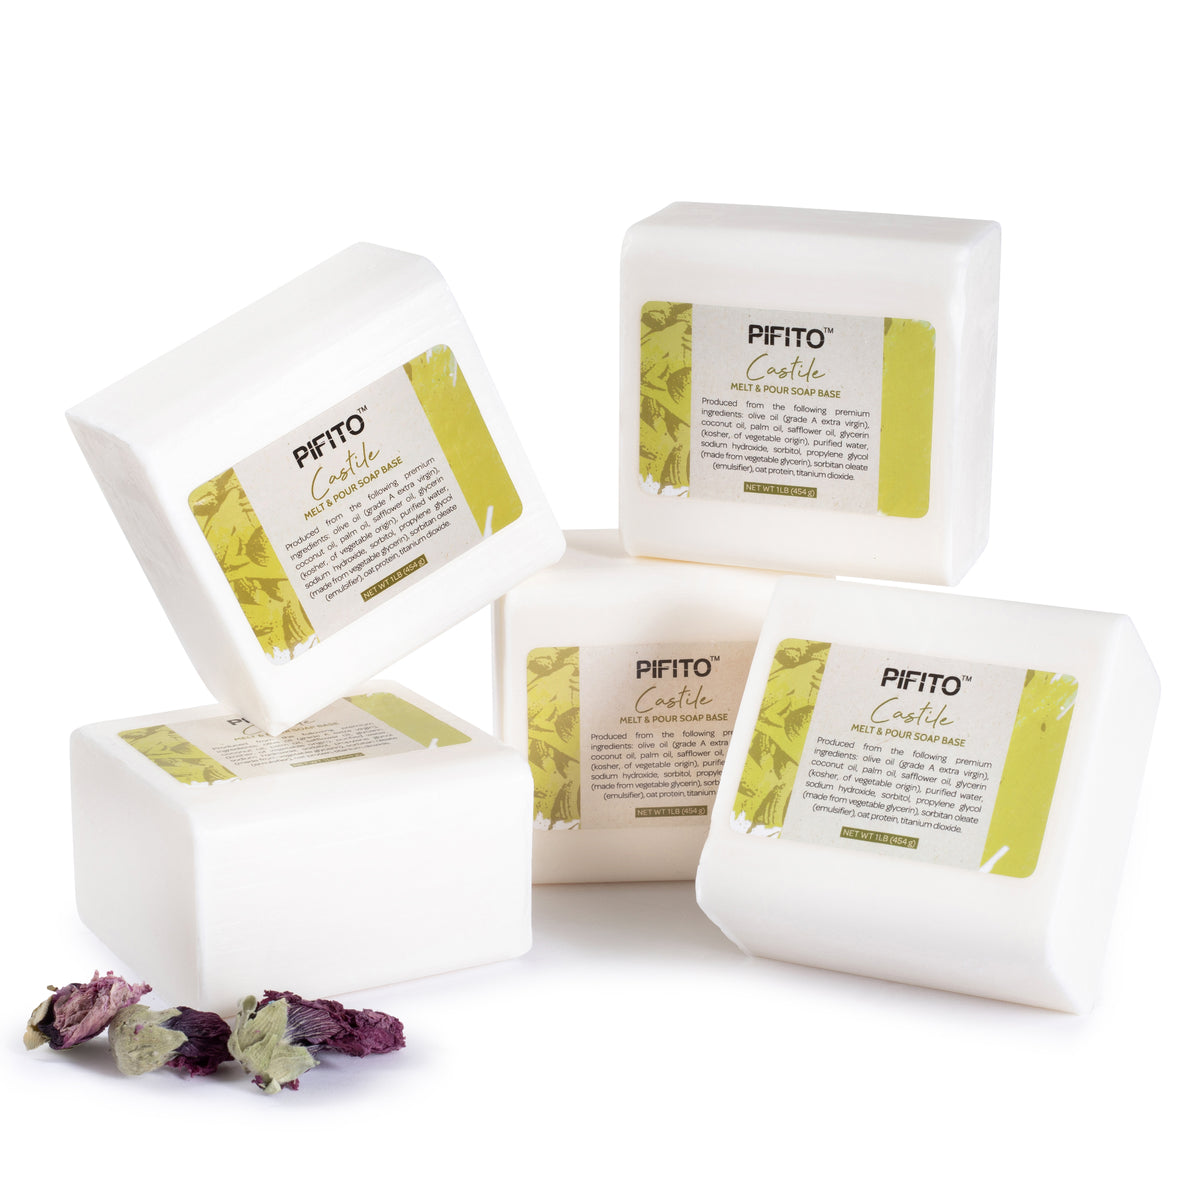 Honey Melt and Pour Soap — The Essential Oil Company